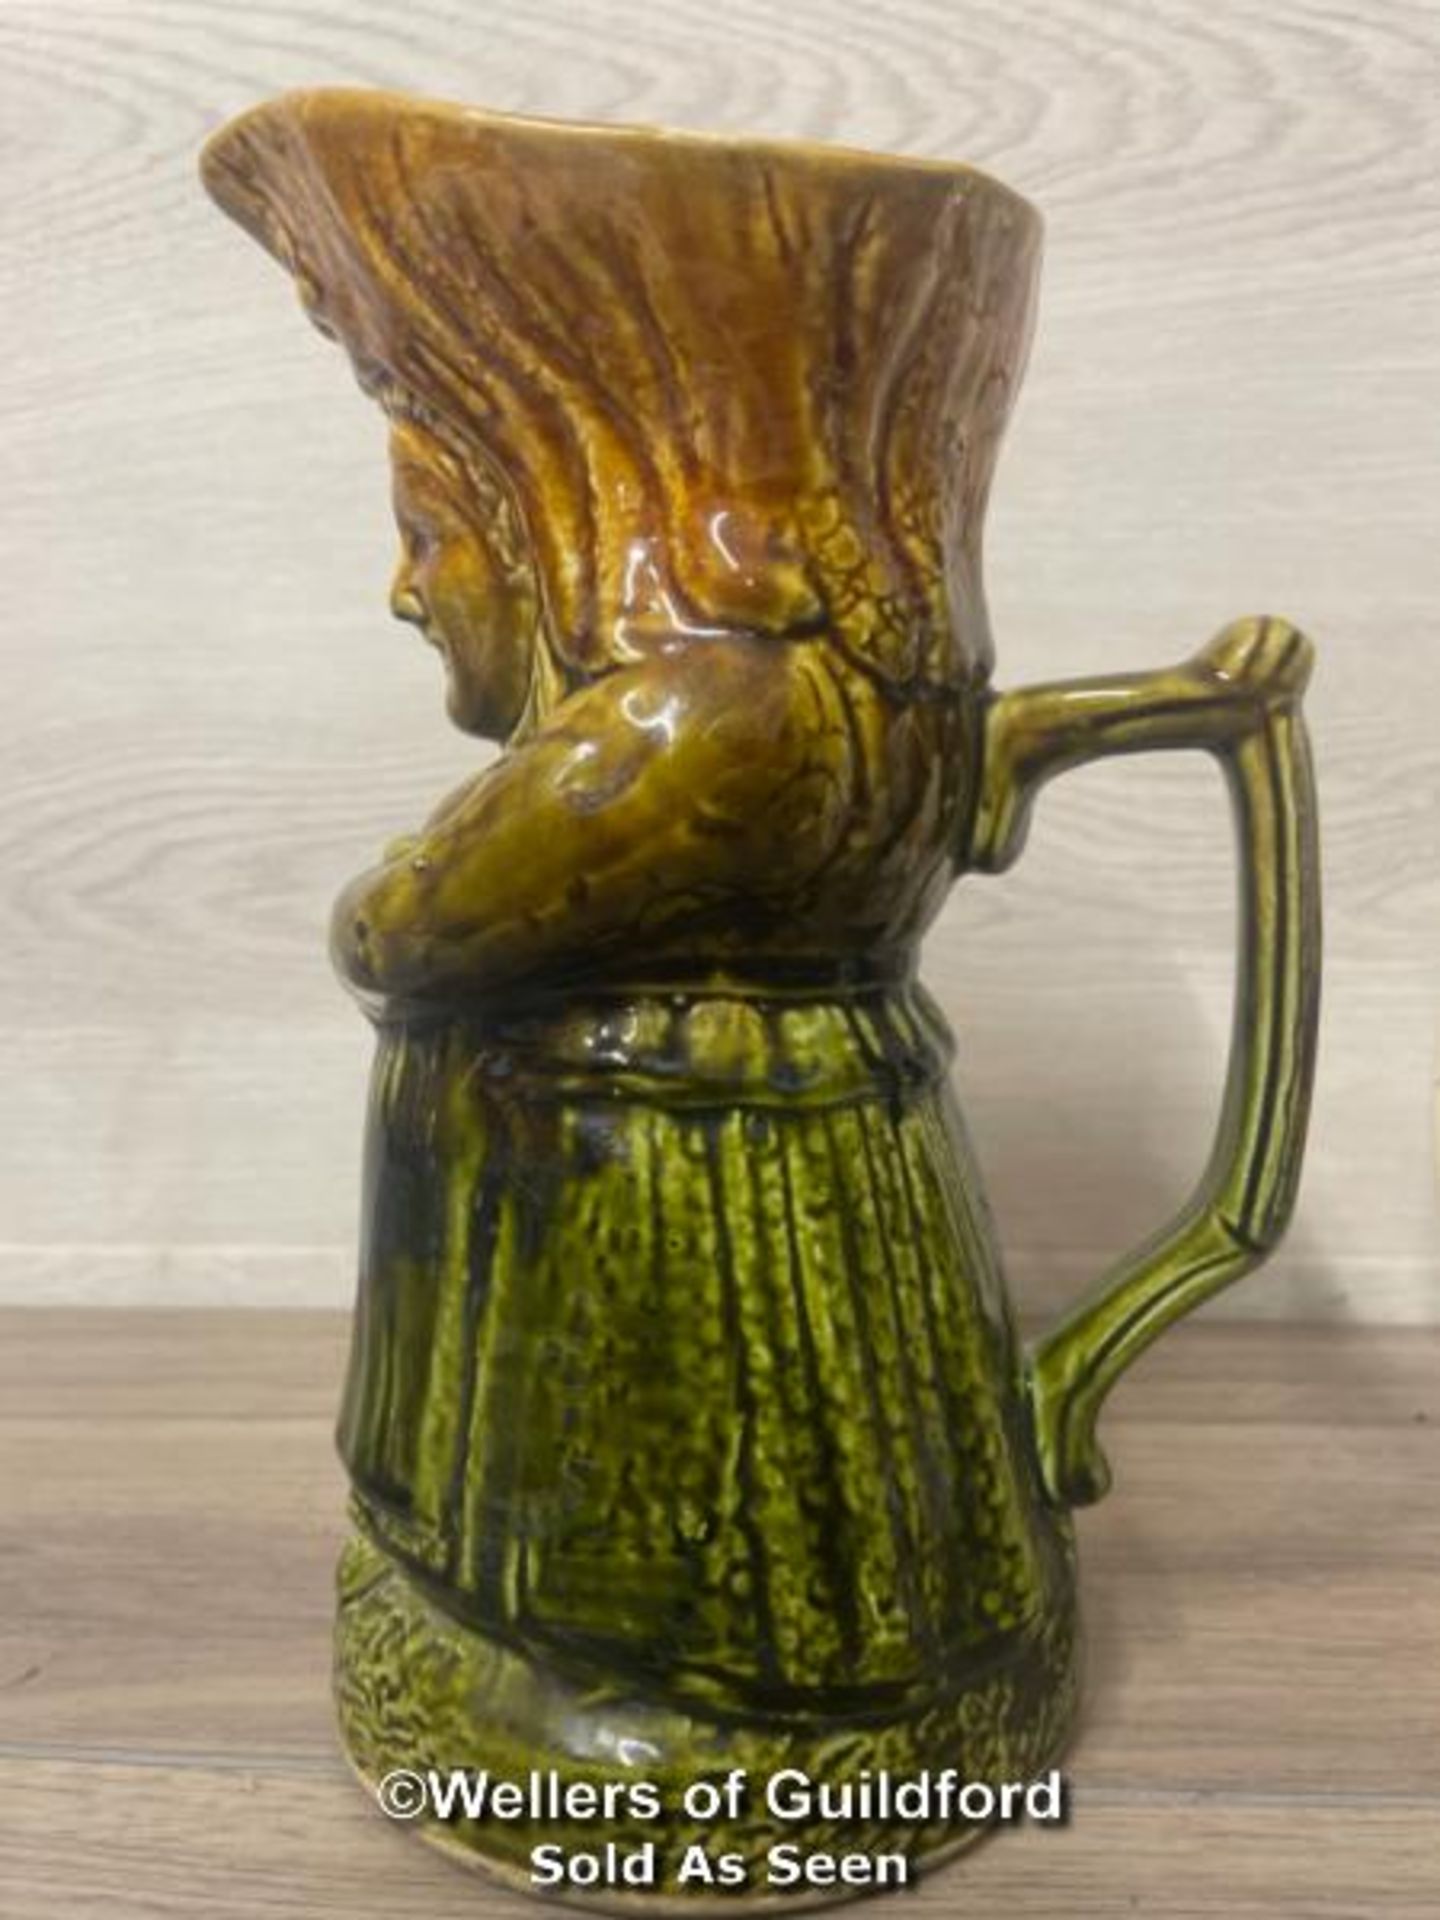 LARGE TOBY JUG VASE OF A LADY WITH IN GREEN SKIRT, 9" HIGH - Image 2 of 4